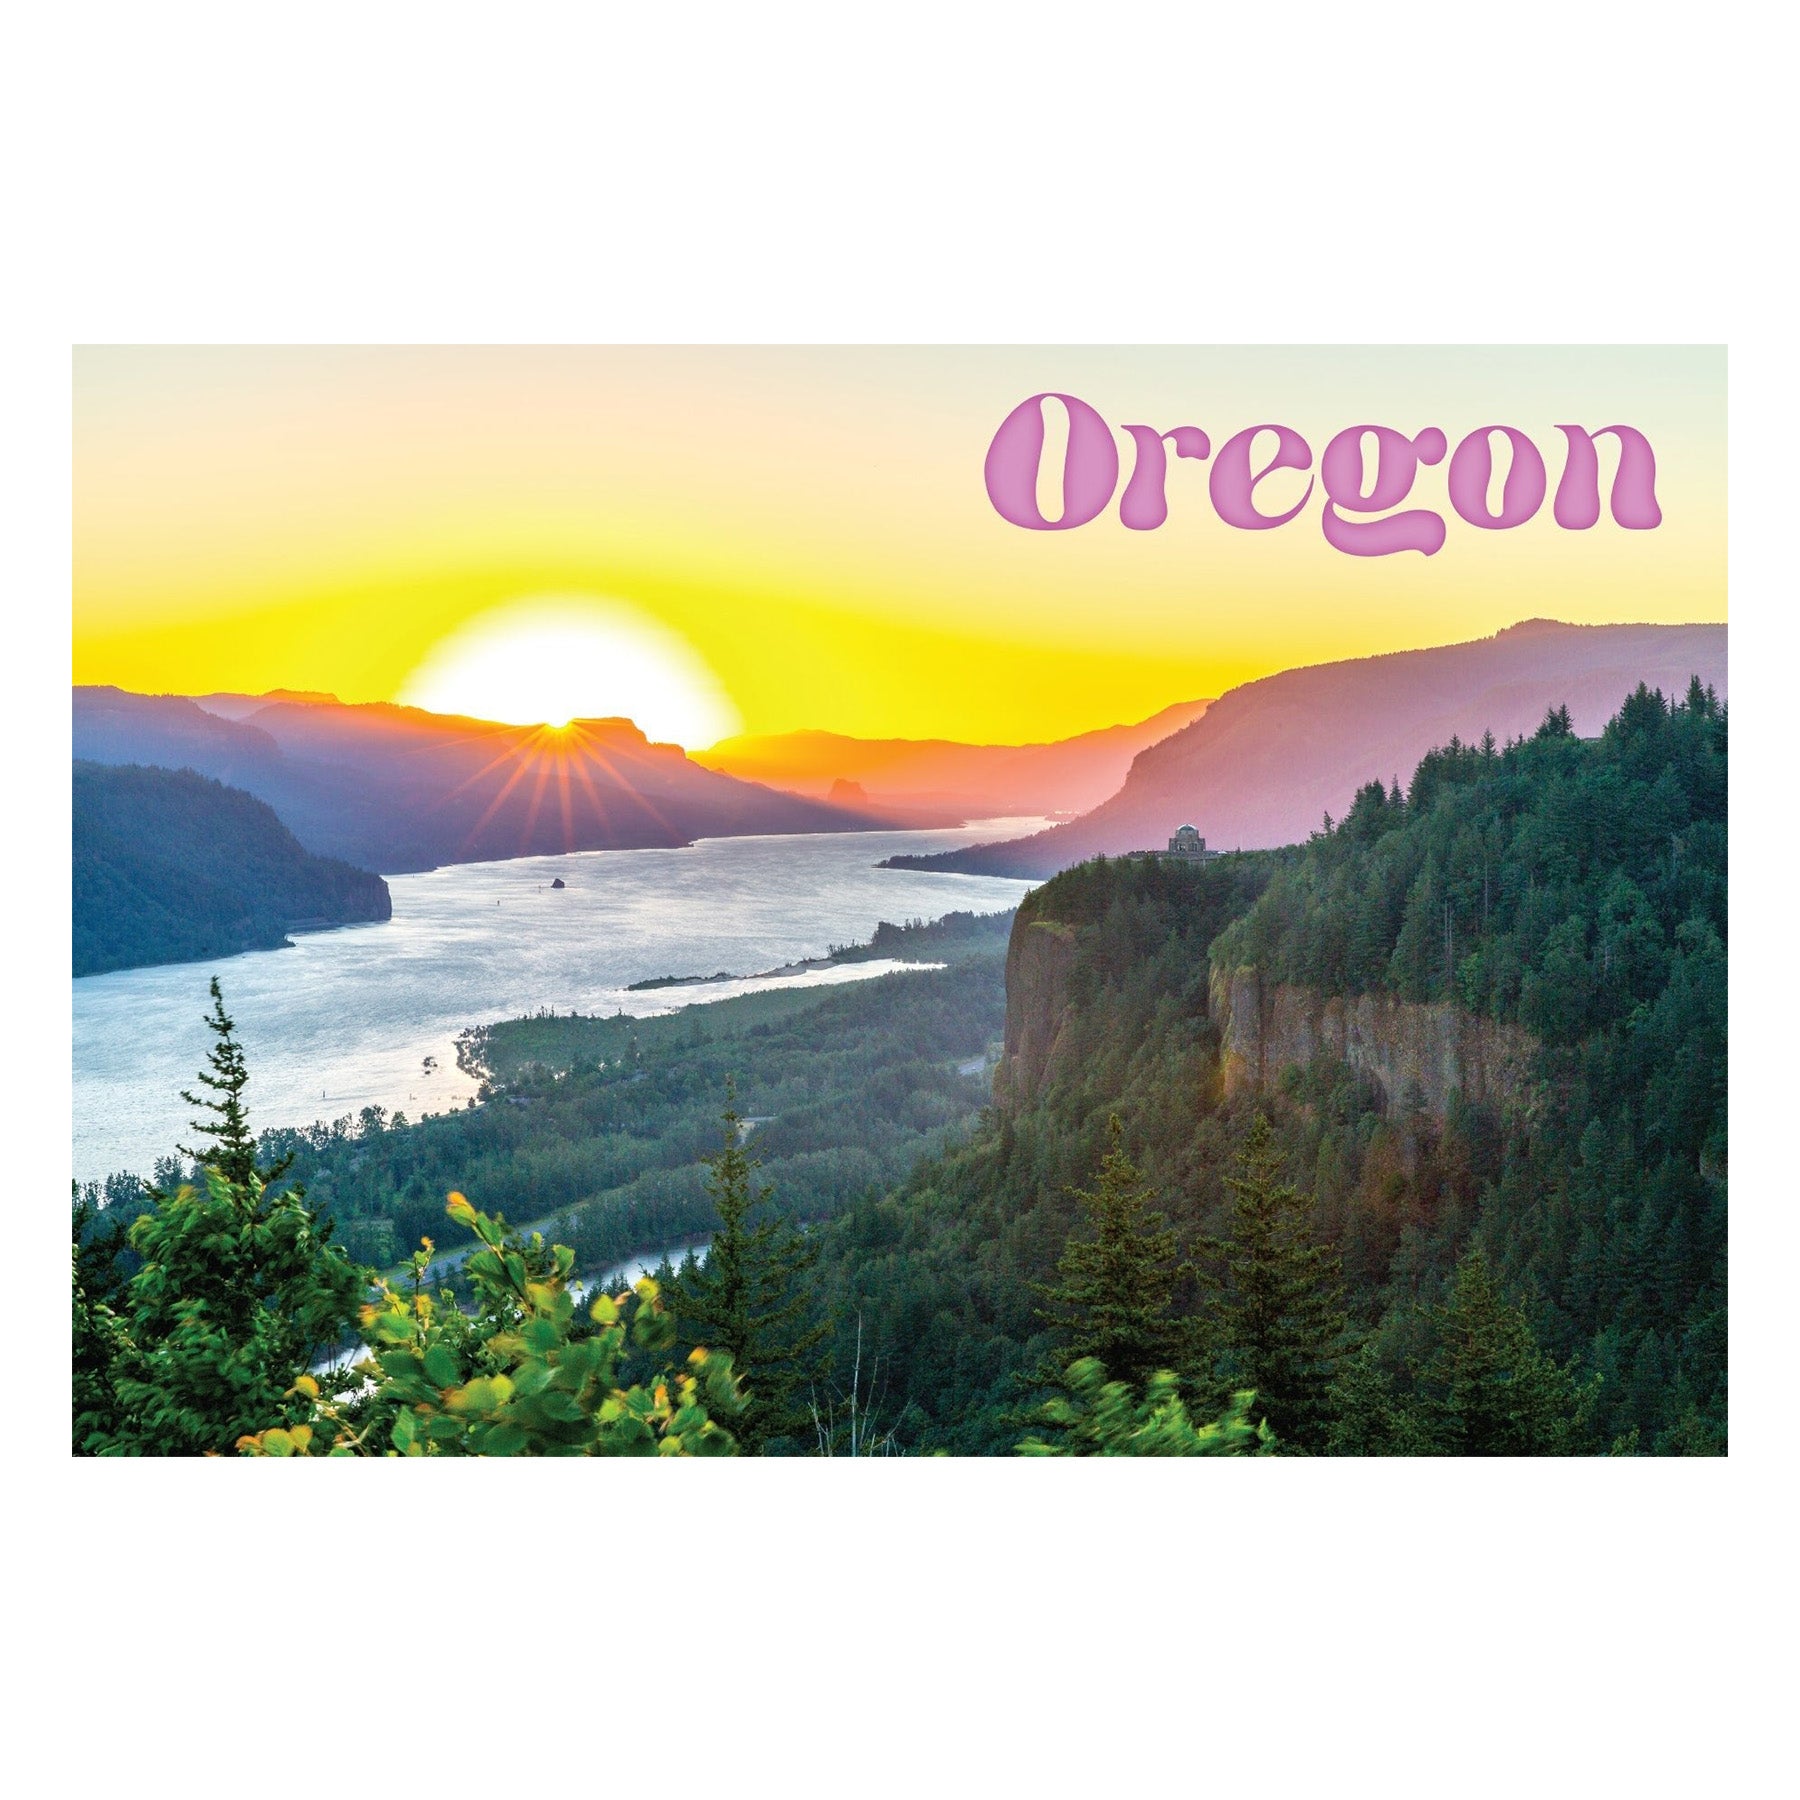 The Gorge Postcard - Postcards - Hello From Portland